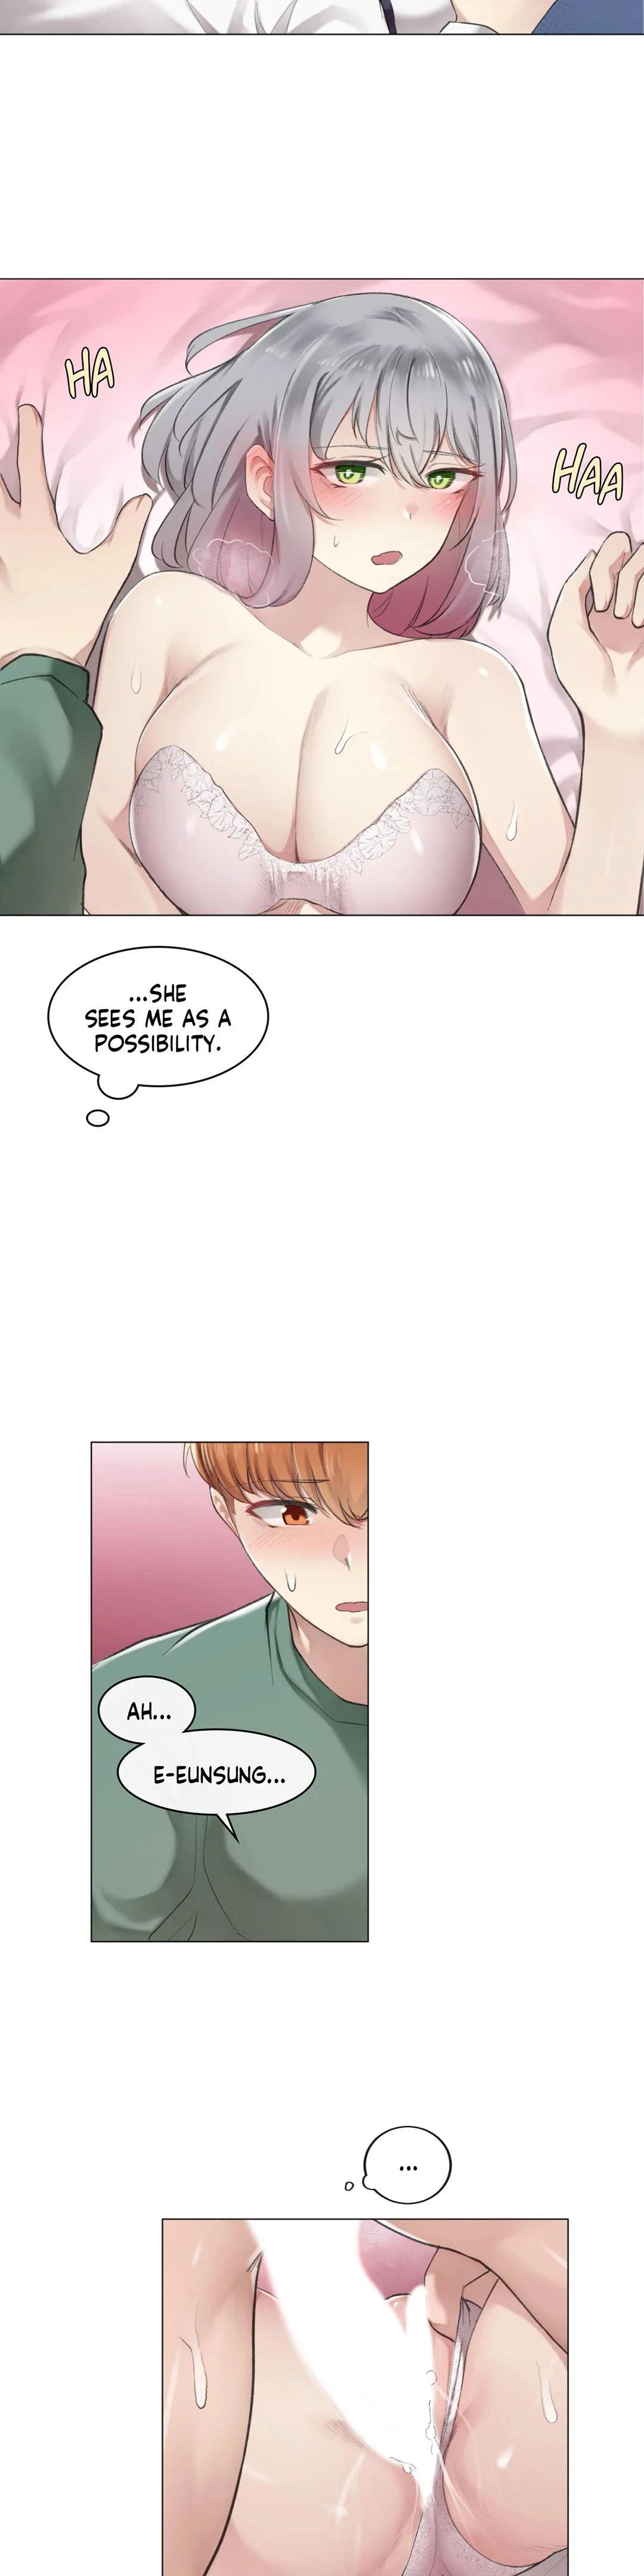 [Dumangoon, KONG_] Sexcape Room: Snap Off Ch.7/7 [English] [Manhwa PDF] Completed 98